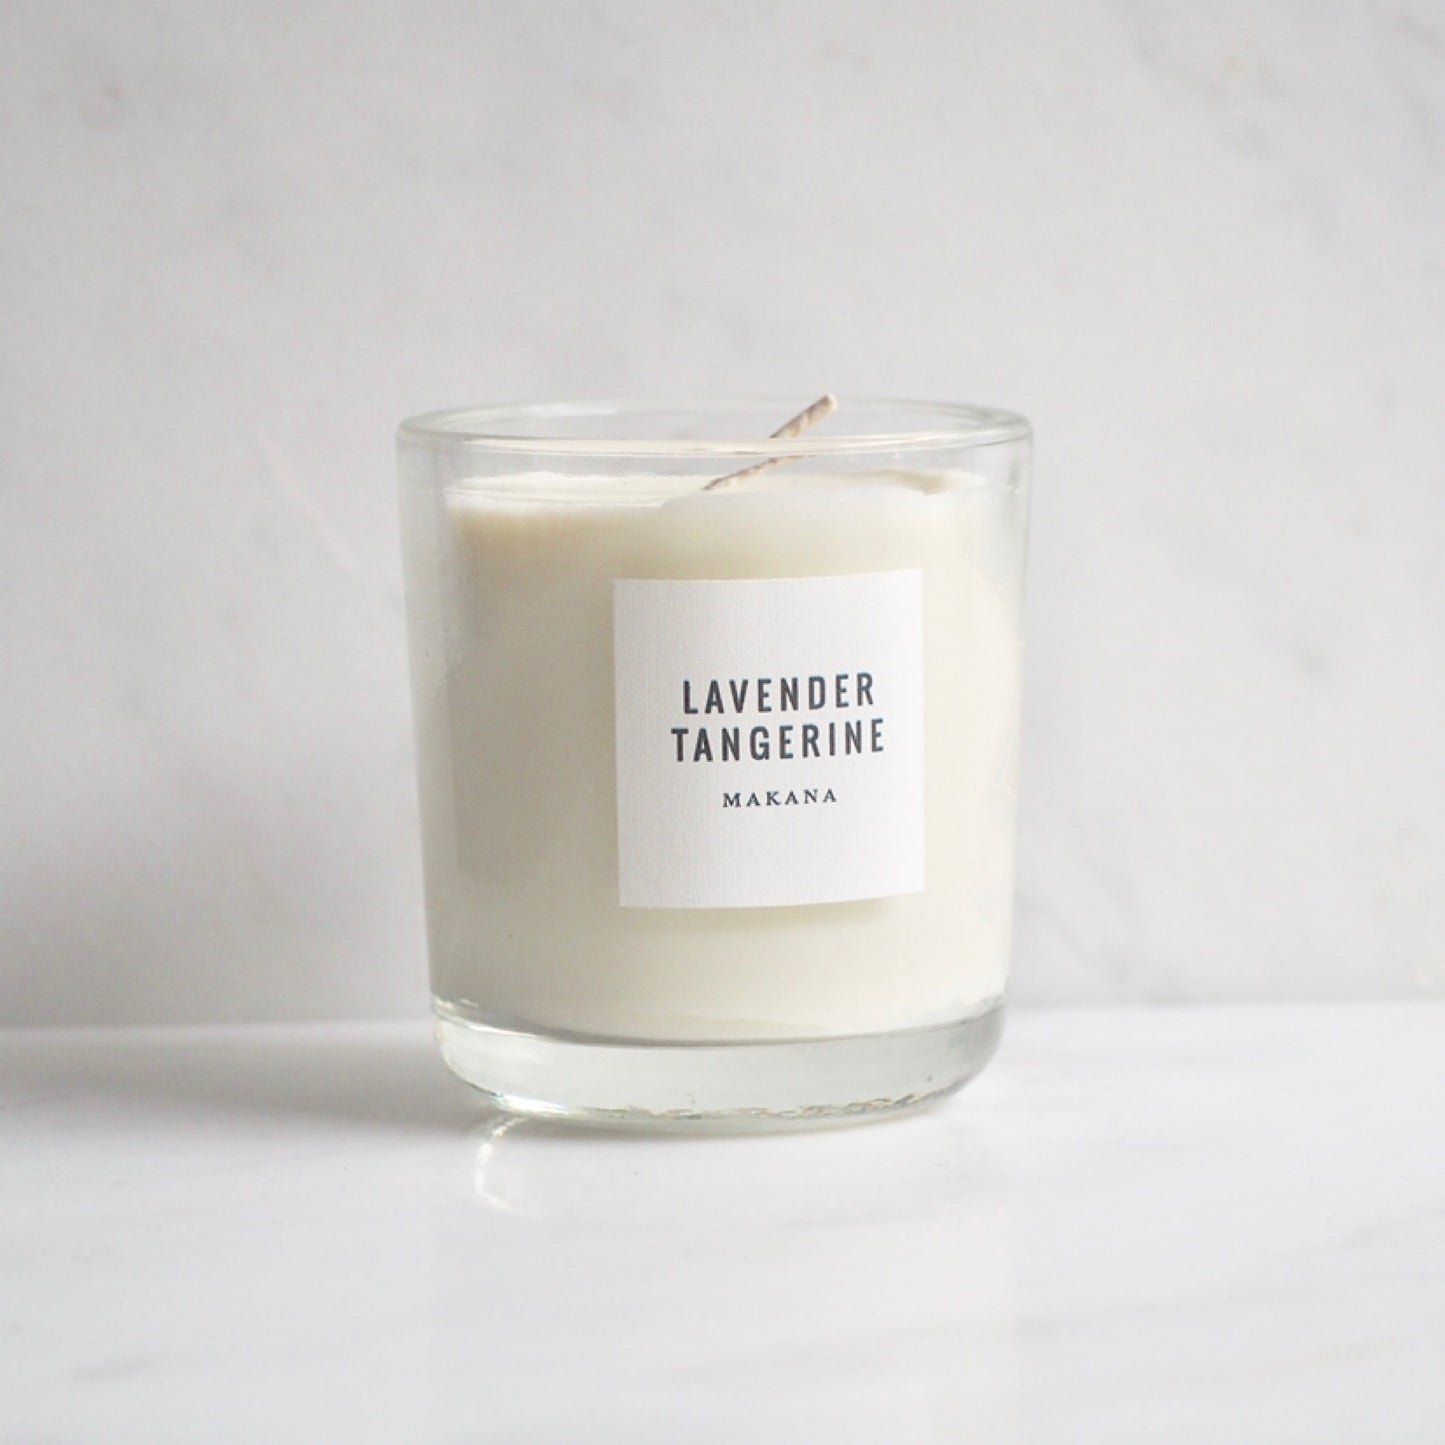 By Makana Candles Lavender Tangerine Candle: A composition of lavender, eucalyptus and tangerine, this scent promotes balance, peace and mindfulness. Hand-poured in-house in small batches using simple, clean ingredients – 100% soy wax, lead-free cotton wicking, and phthalate-free fragrances.